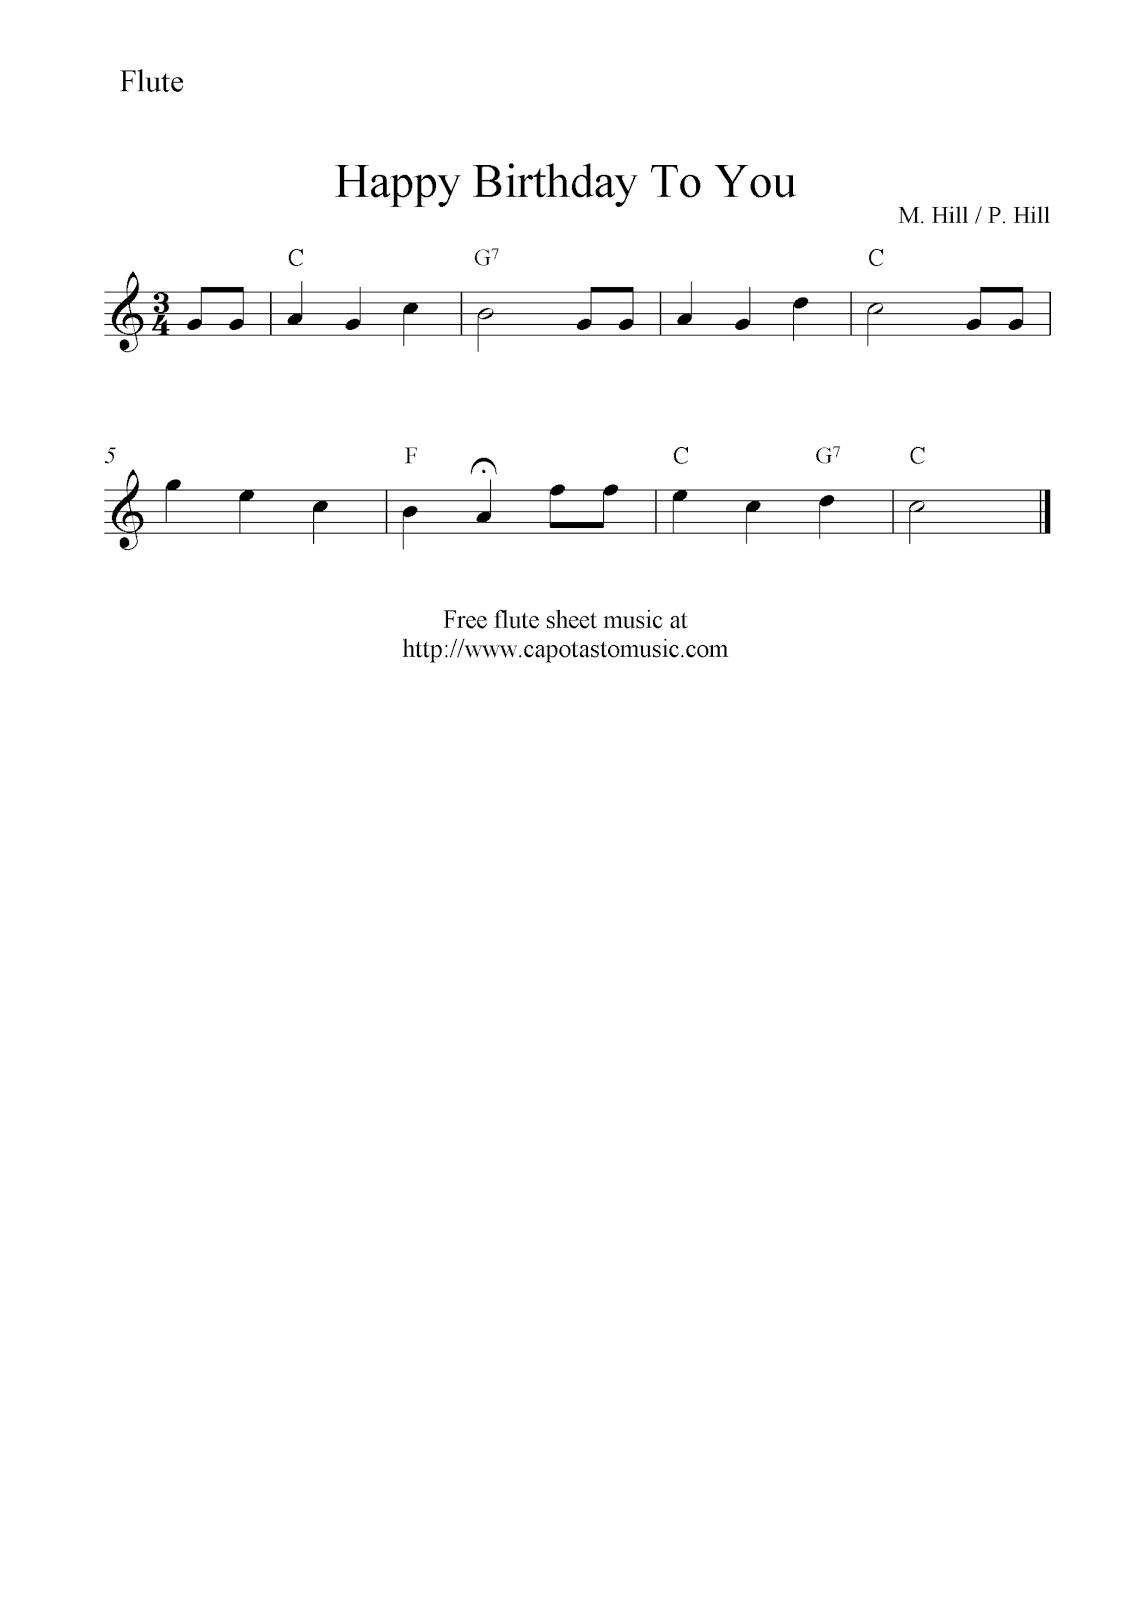 Happy Birthday To You, Free Flute Sheet Music Notes - Free Printable Flute Music